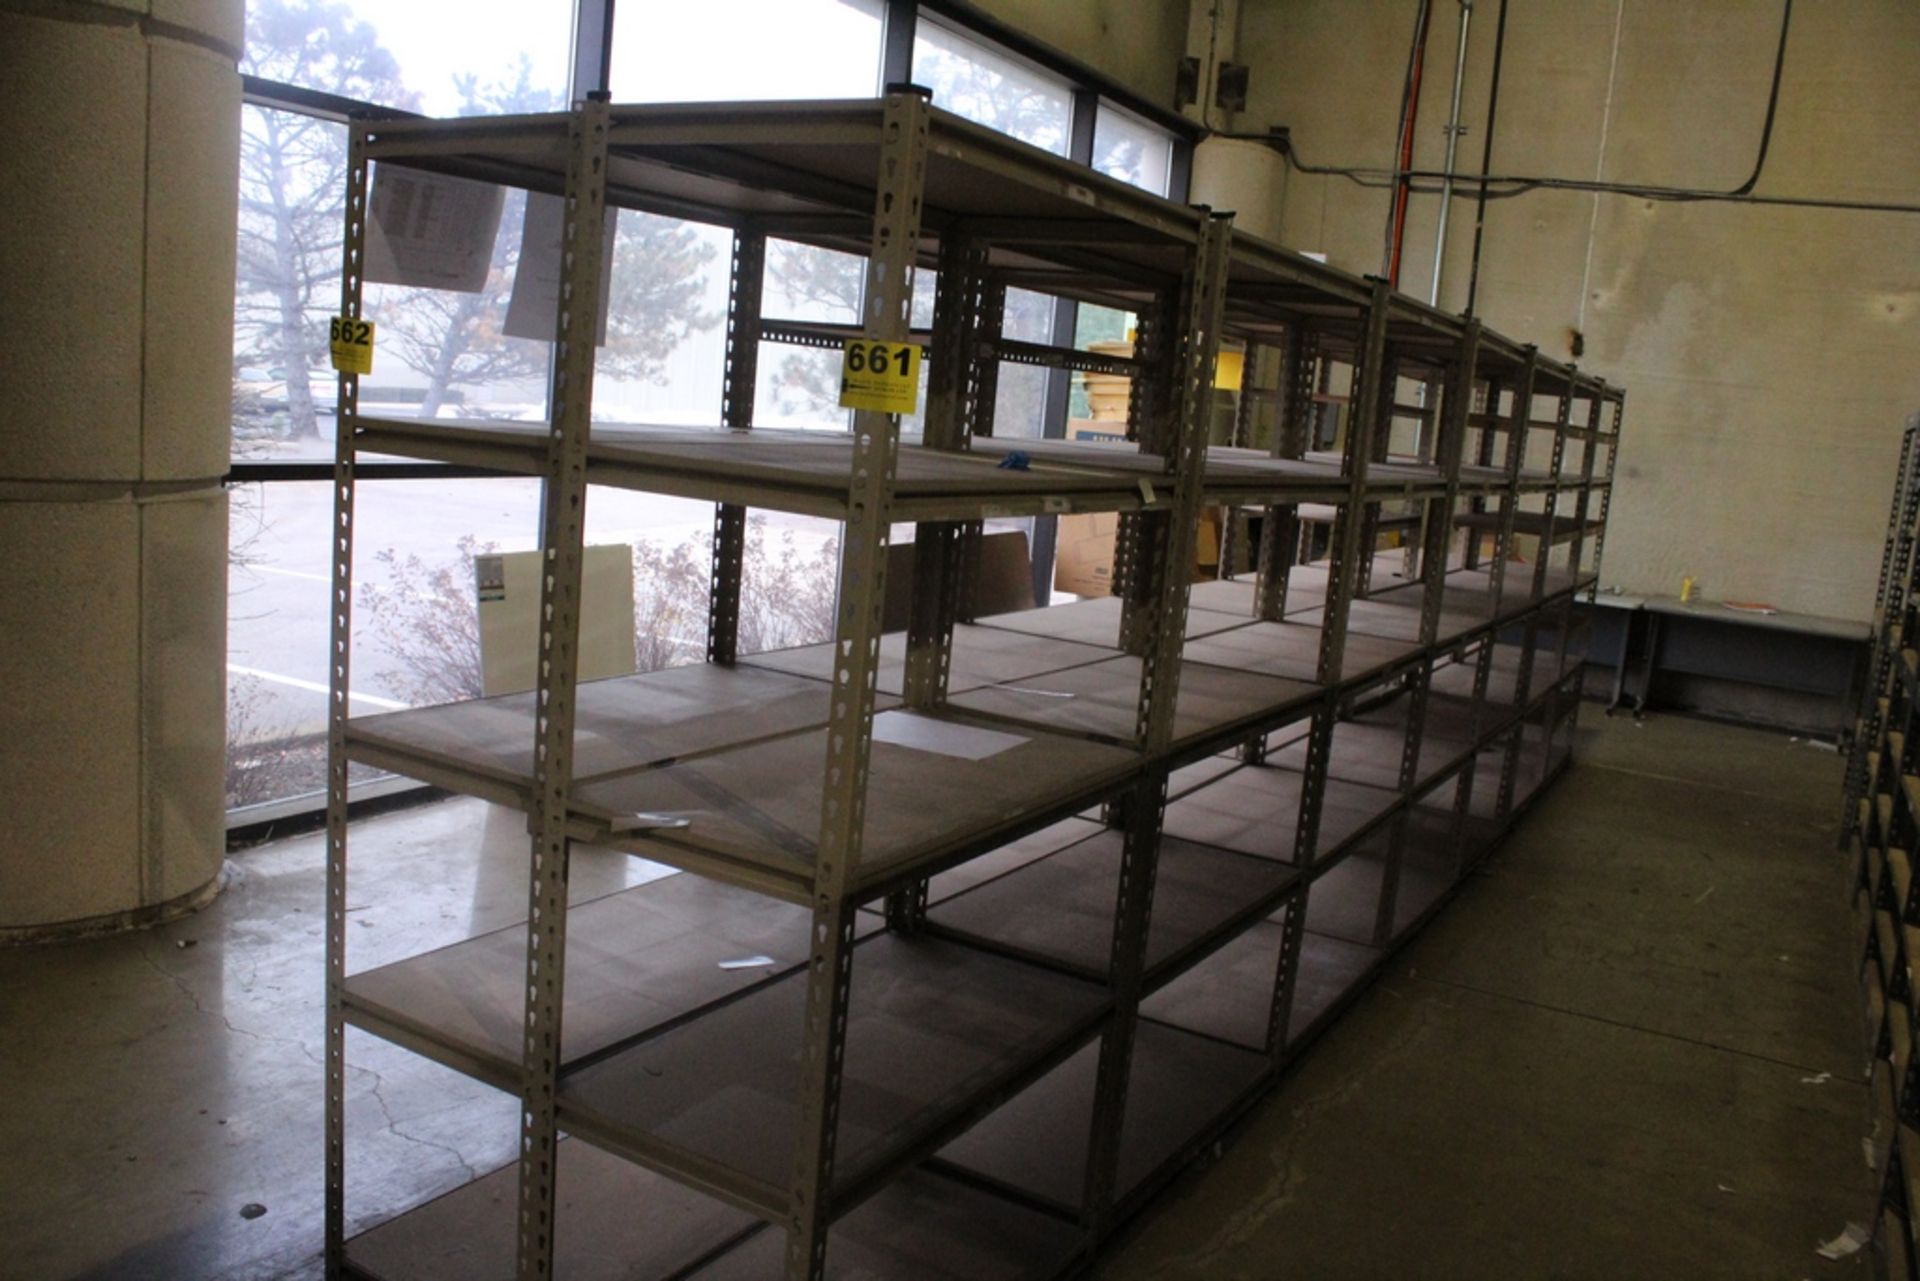 (7) SECTIONS OF METAL/WOOD SHELVES, 21' X 72" X 18"